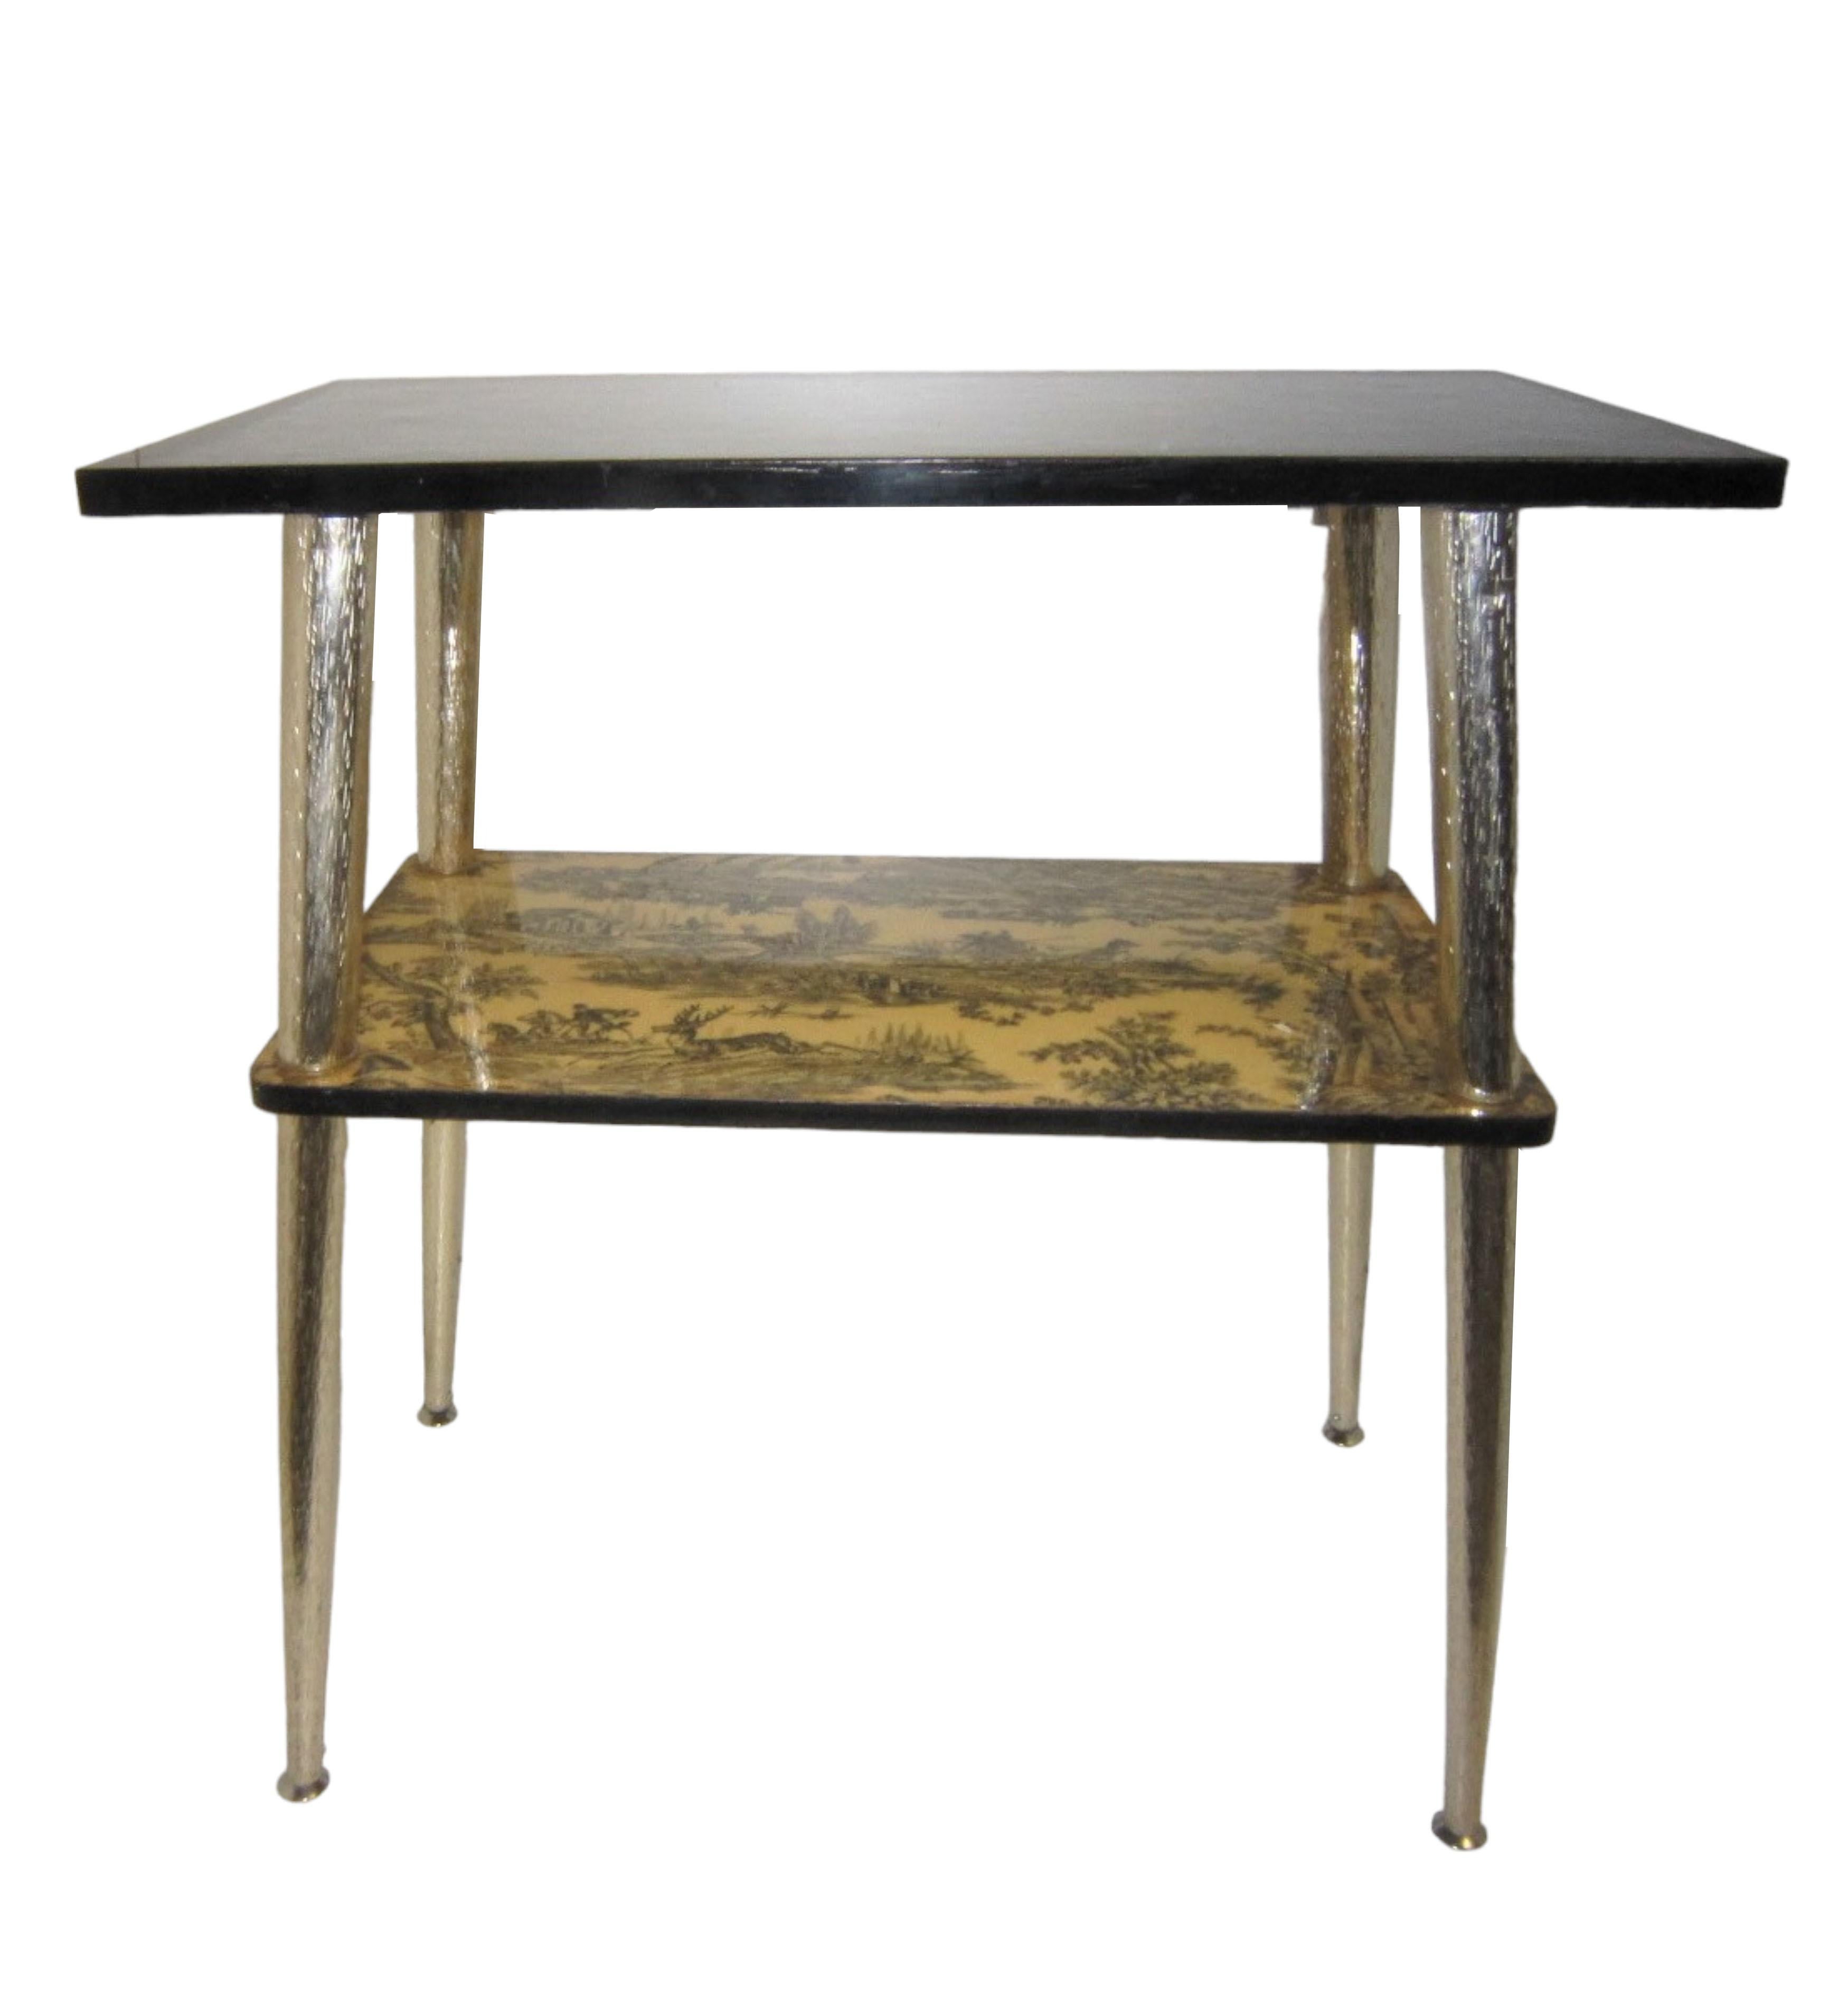 A French midcentury serving table featuring a black top depicting a hunting scene on second tier; the whole raised on slender tapering satin nickel metal legs with a hammered pattern.
The stretcher shelf is inspired by Toile, a French word meaning